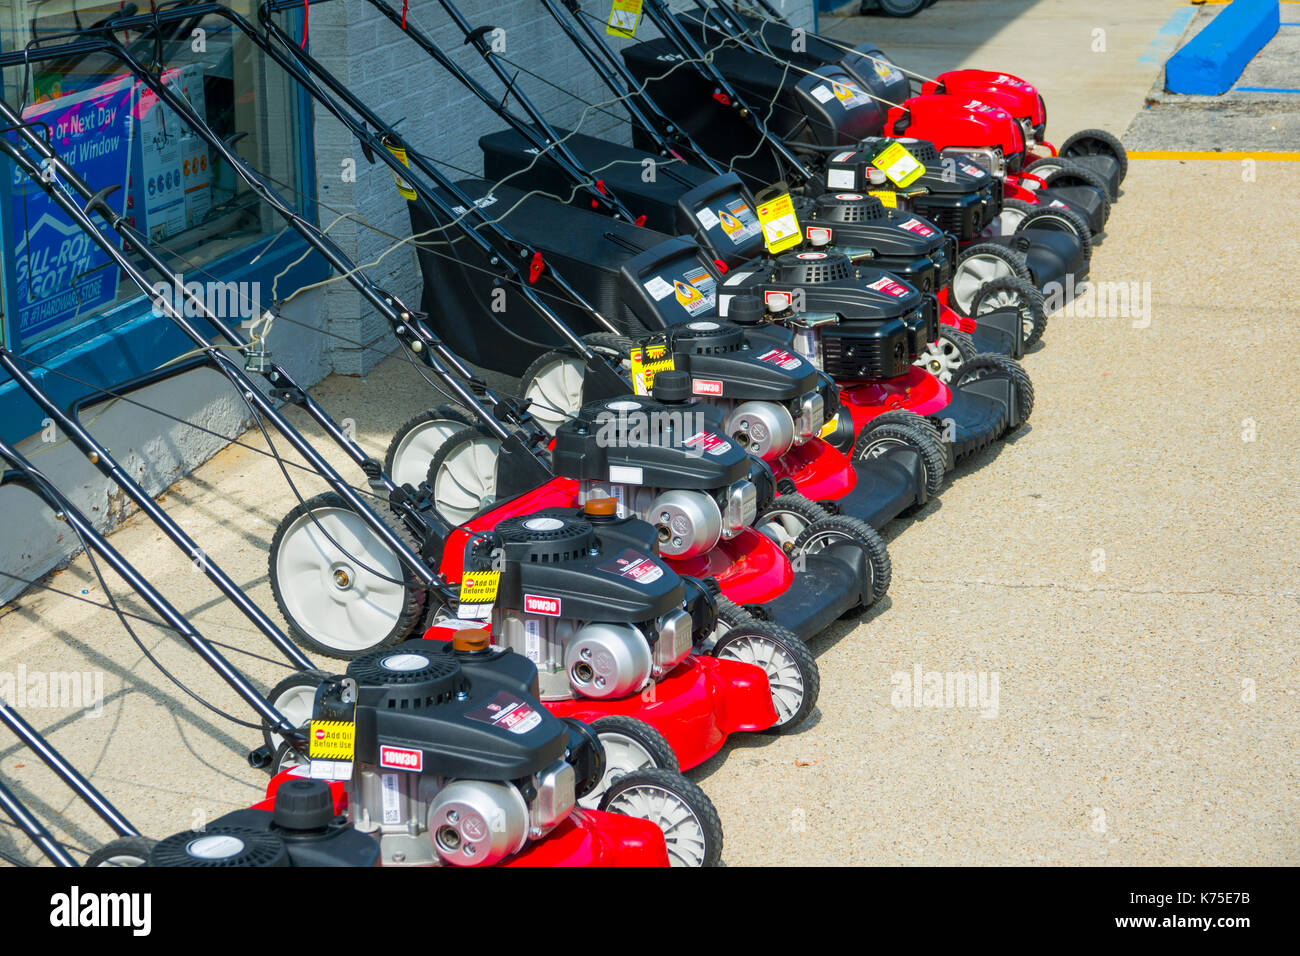 row of red hand pushed lawn mowers for sale outside of a hardware store Stock Photo